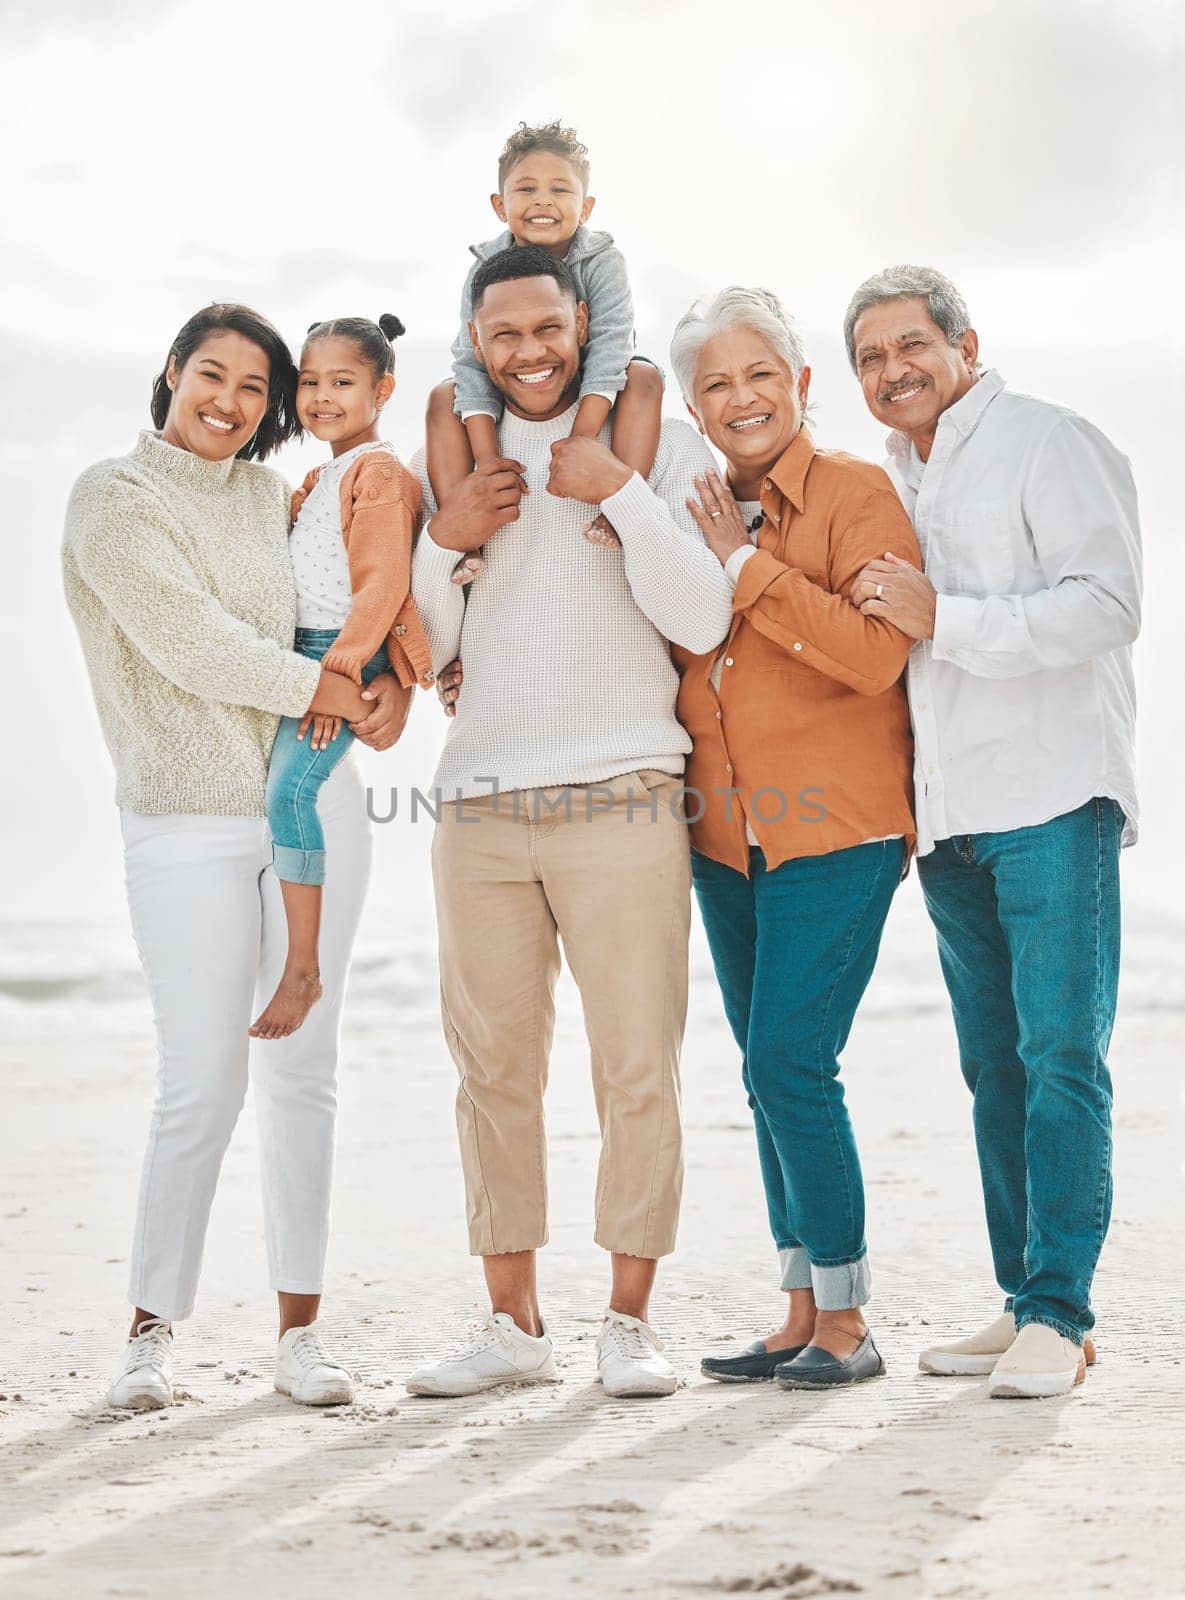 Happy family, travel portrait and beach with grandparents, parent love and kids together by sea. Outdoor, vacation and children with grandmother and father by ocean on holiday in group with a smile.